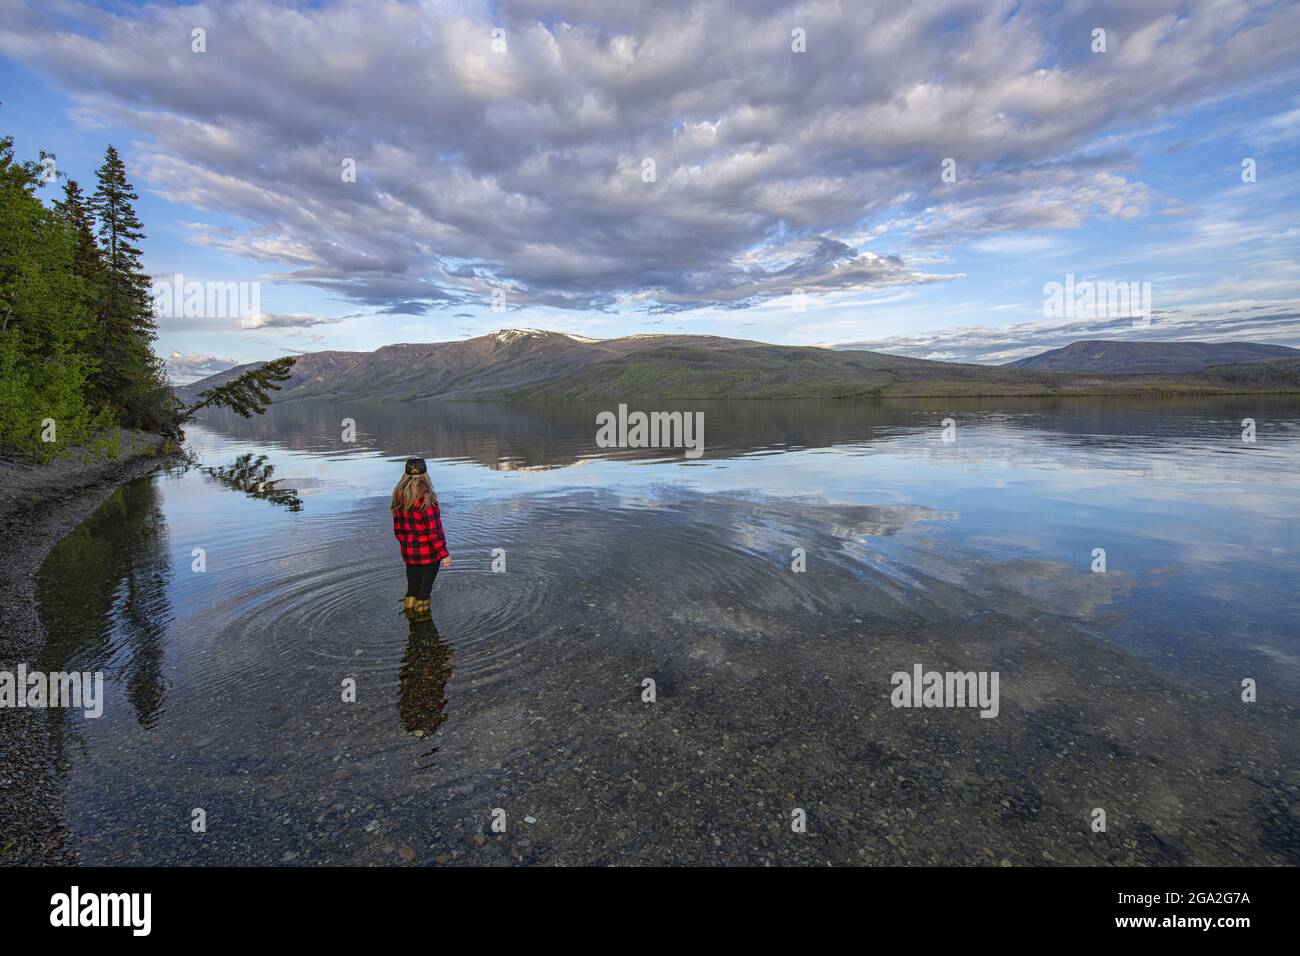 View taken from behind of a woman standing in Little Salmon Lake close to shore, enjoying the view during the late afternoon in the traditional ter... Stock Photo